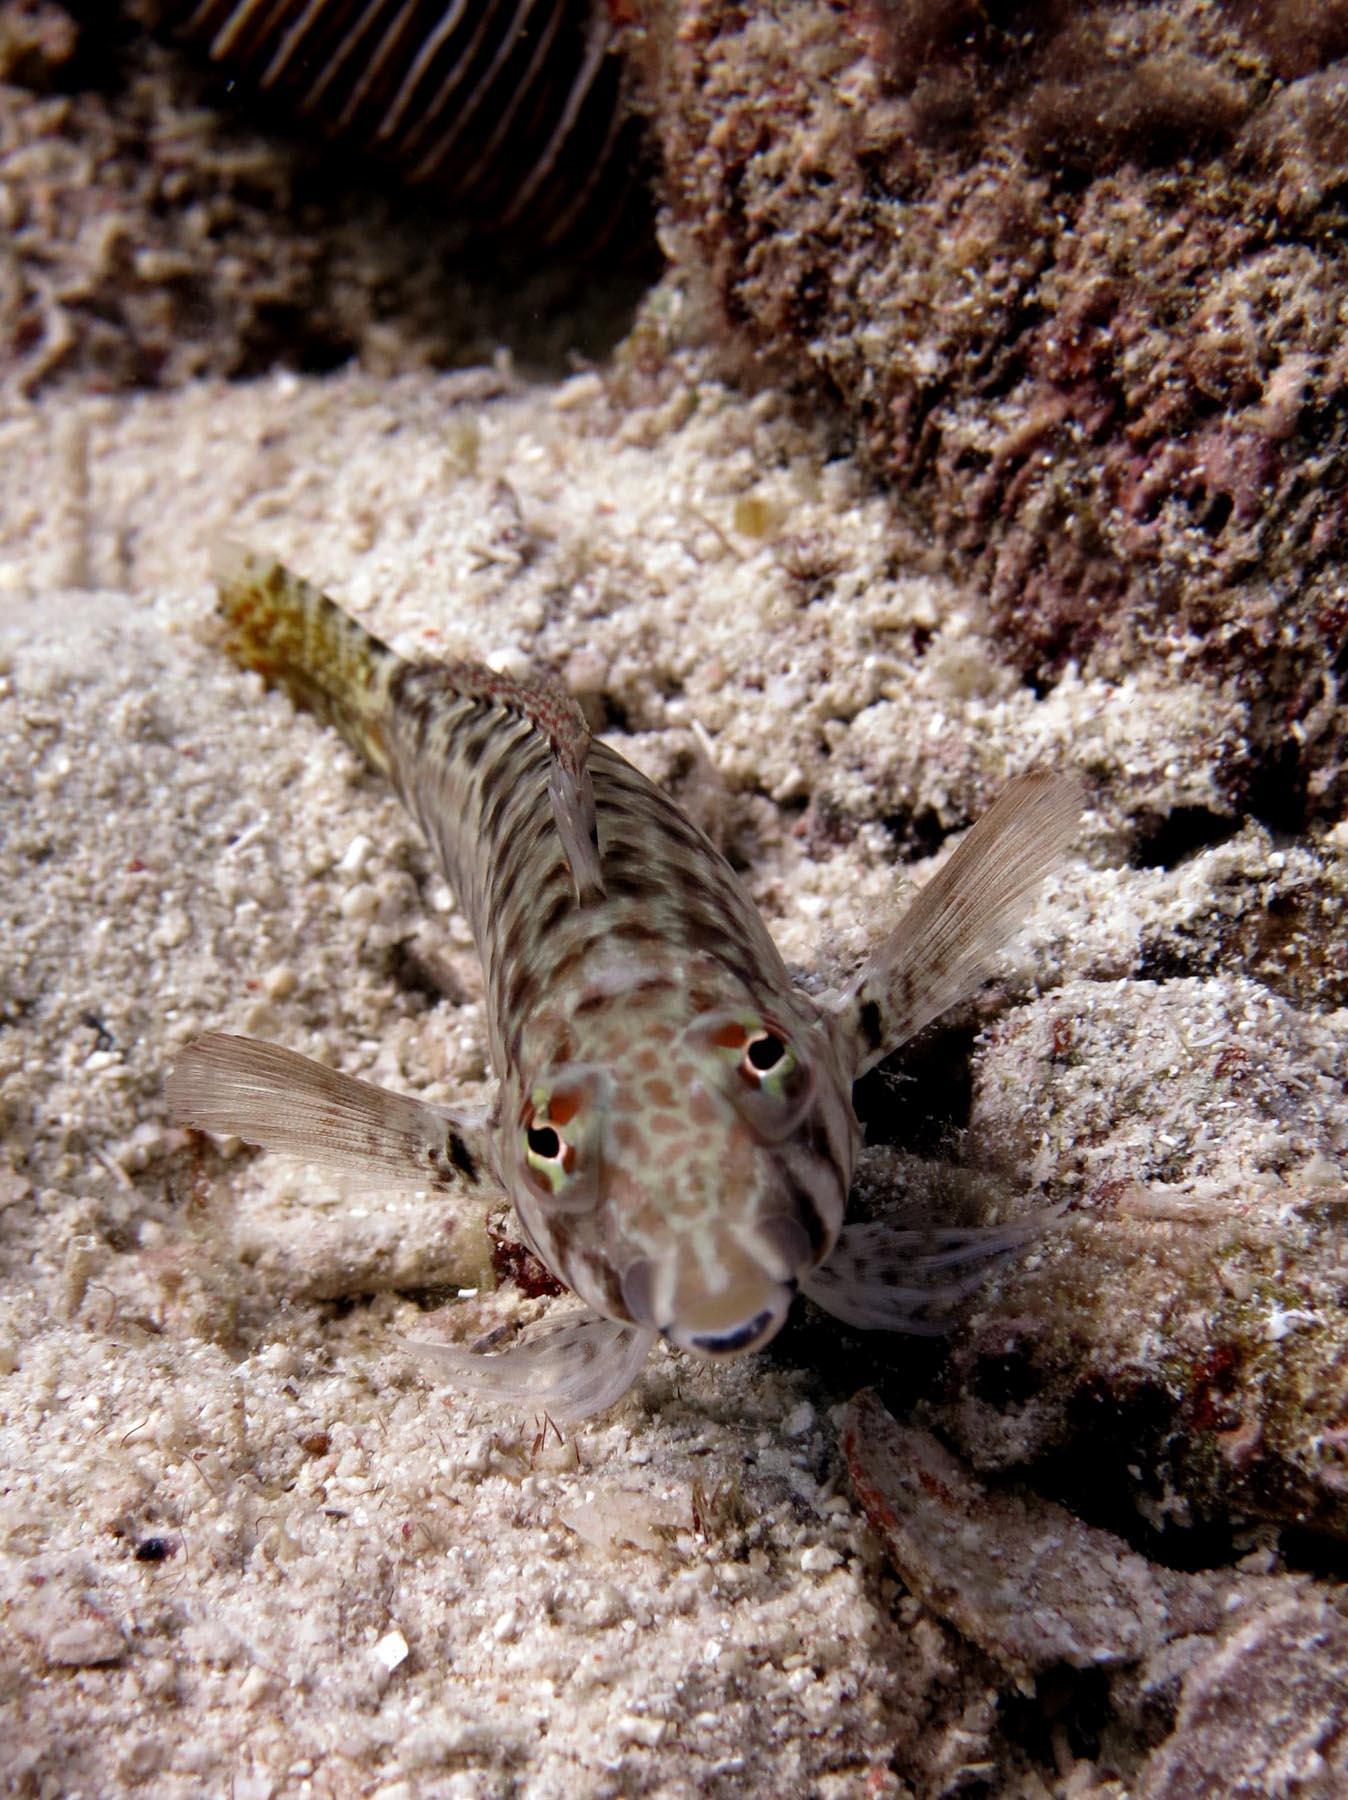 fish with large striped body on rocky ocean floor